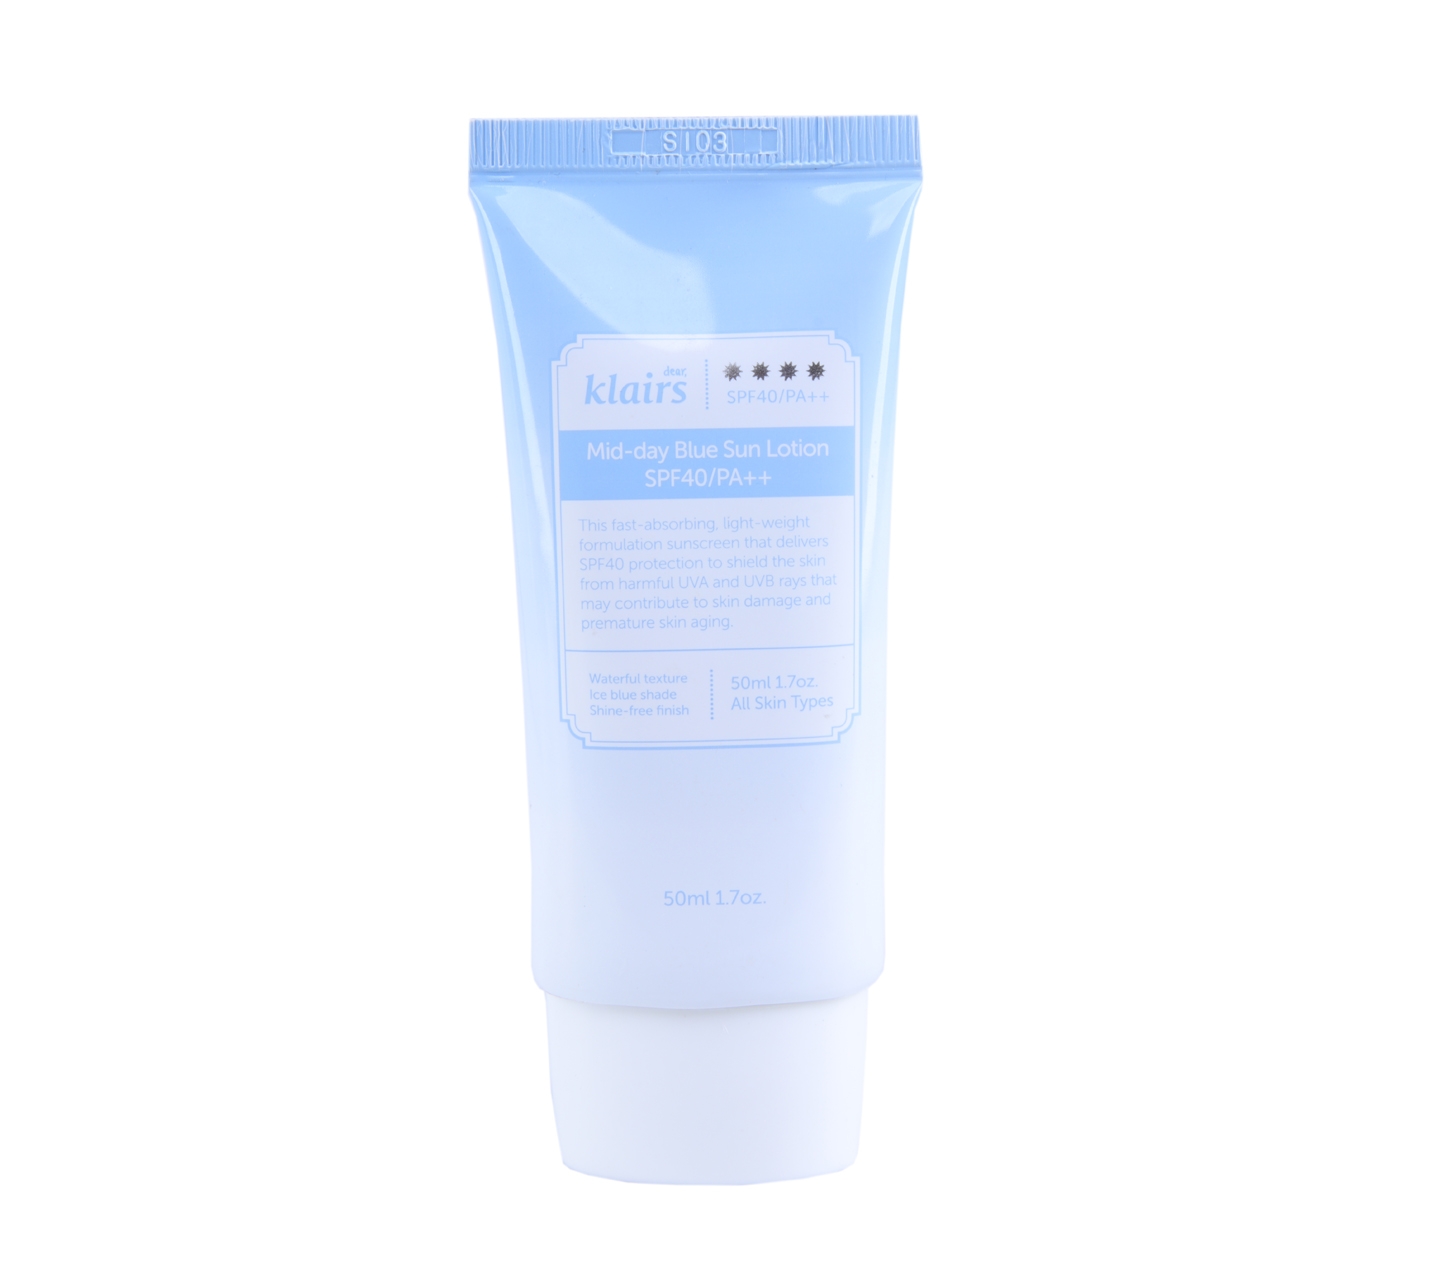 Klairs Mid-day Blue Sun Lotion SPF40/PA++ Faces